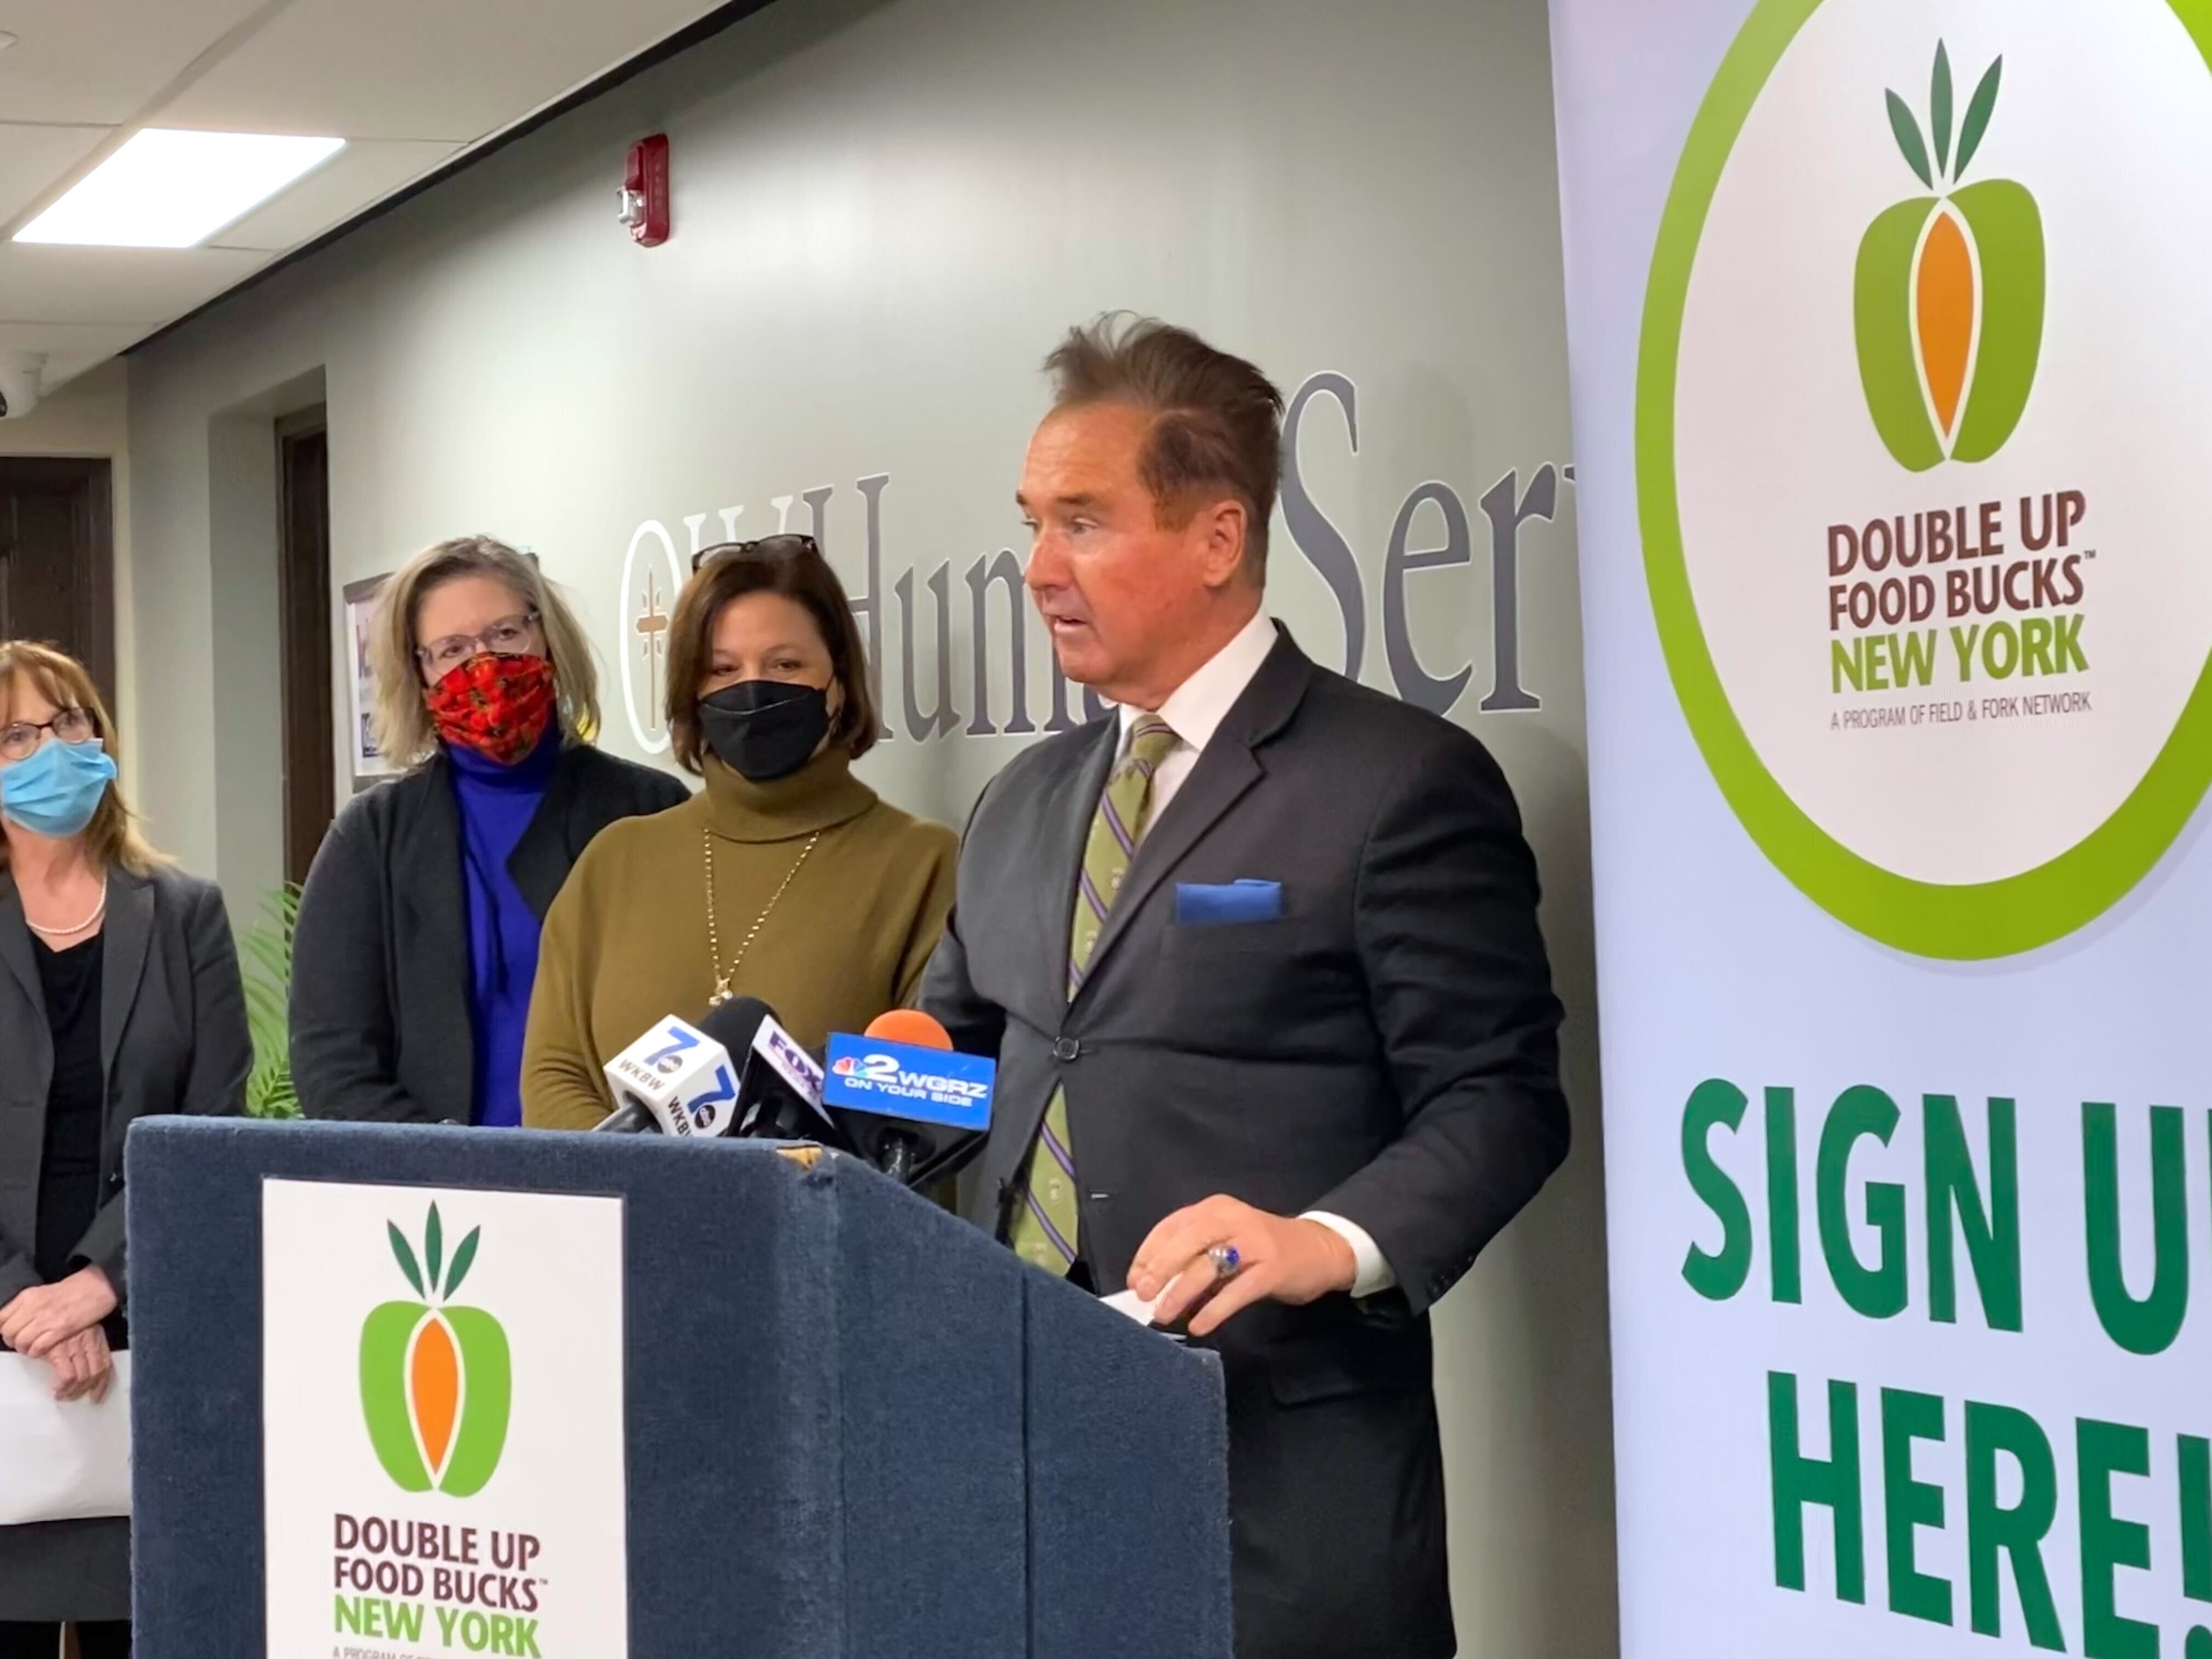 Pictured at a press conference are Cindy Lee of OLV Human Services, Tara Ellis of FeedMore WNY, Lisa French of Field & Fork, and Congressman Brian Higgins. (Submitted photo)